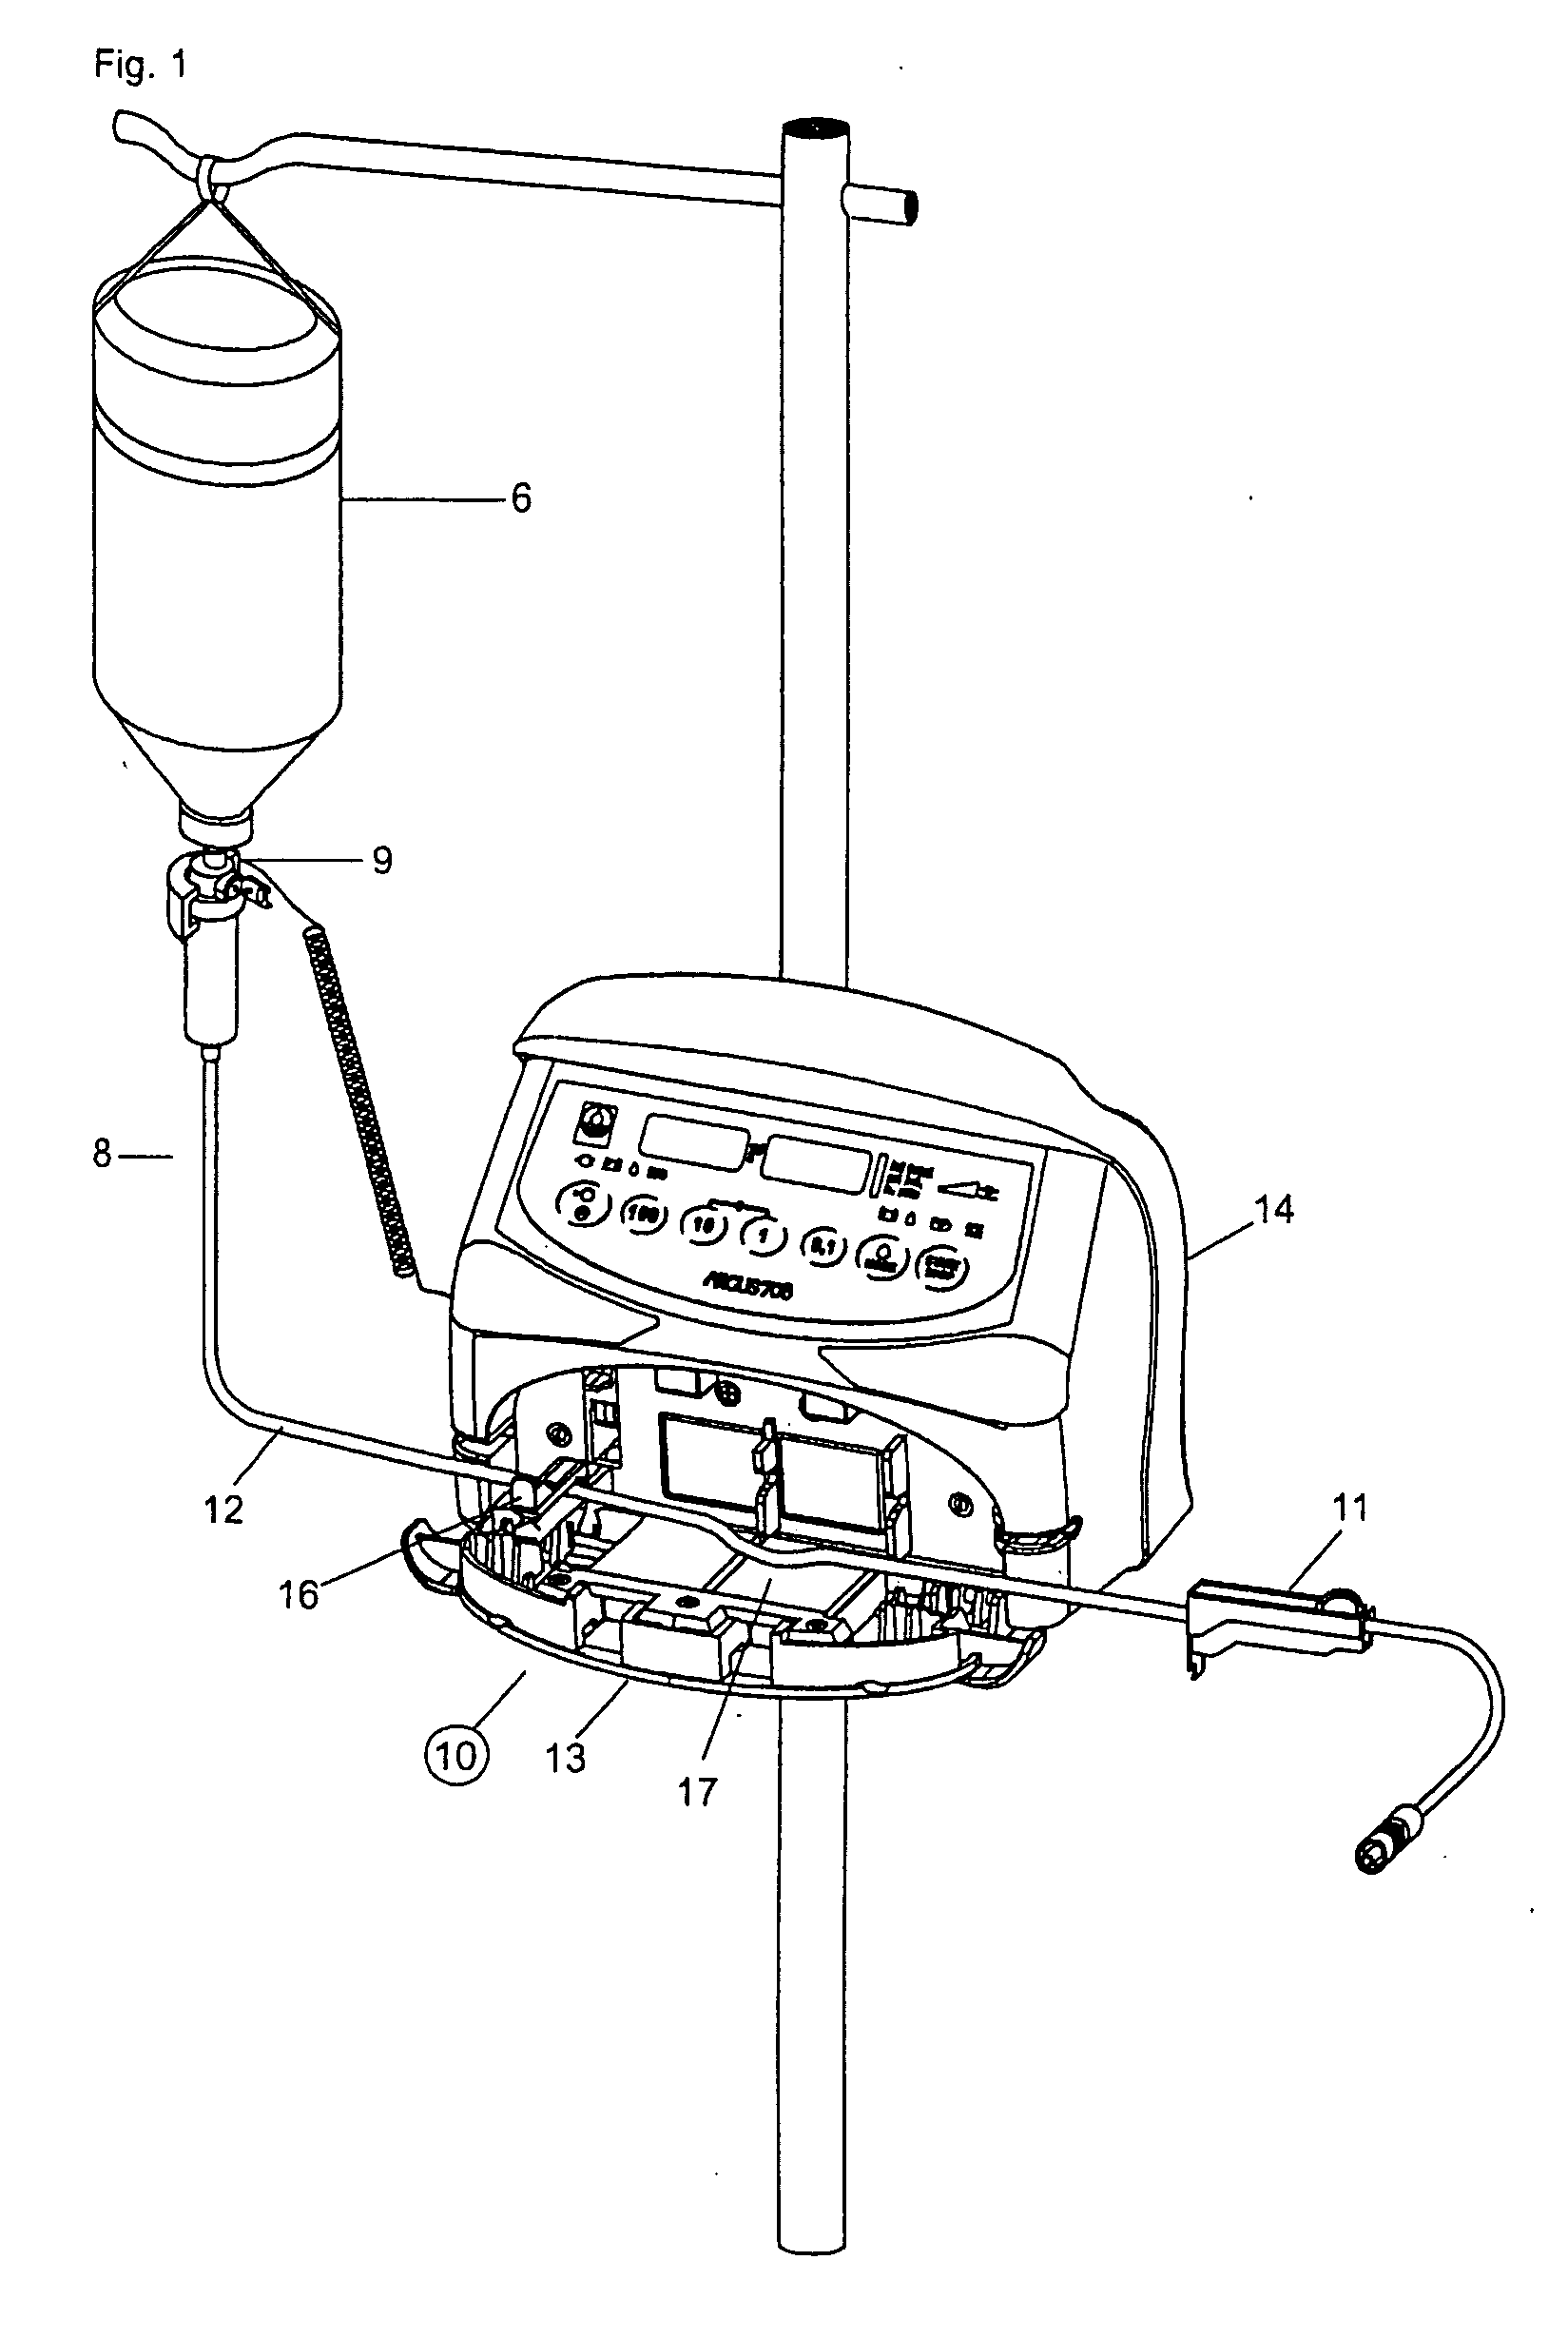 Arrangement for the coupling of an intravenous tube with infusion pump